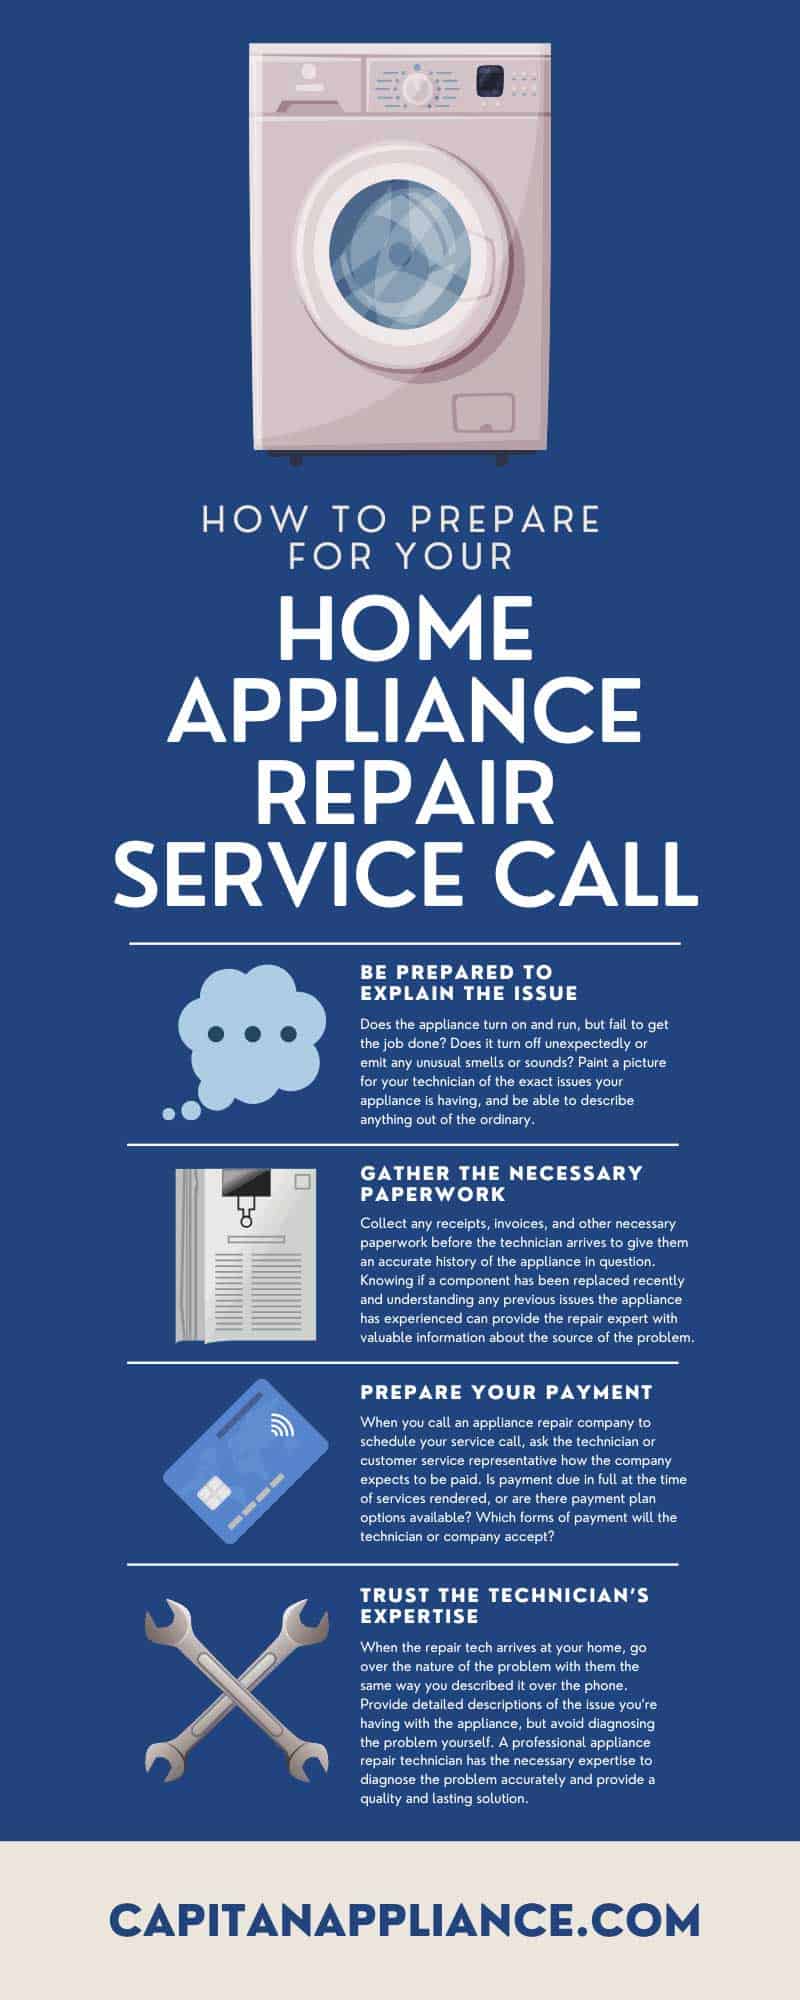 How To Prepare for Your Home Appliance Repair Service Call